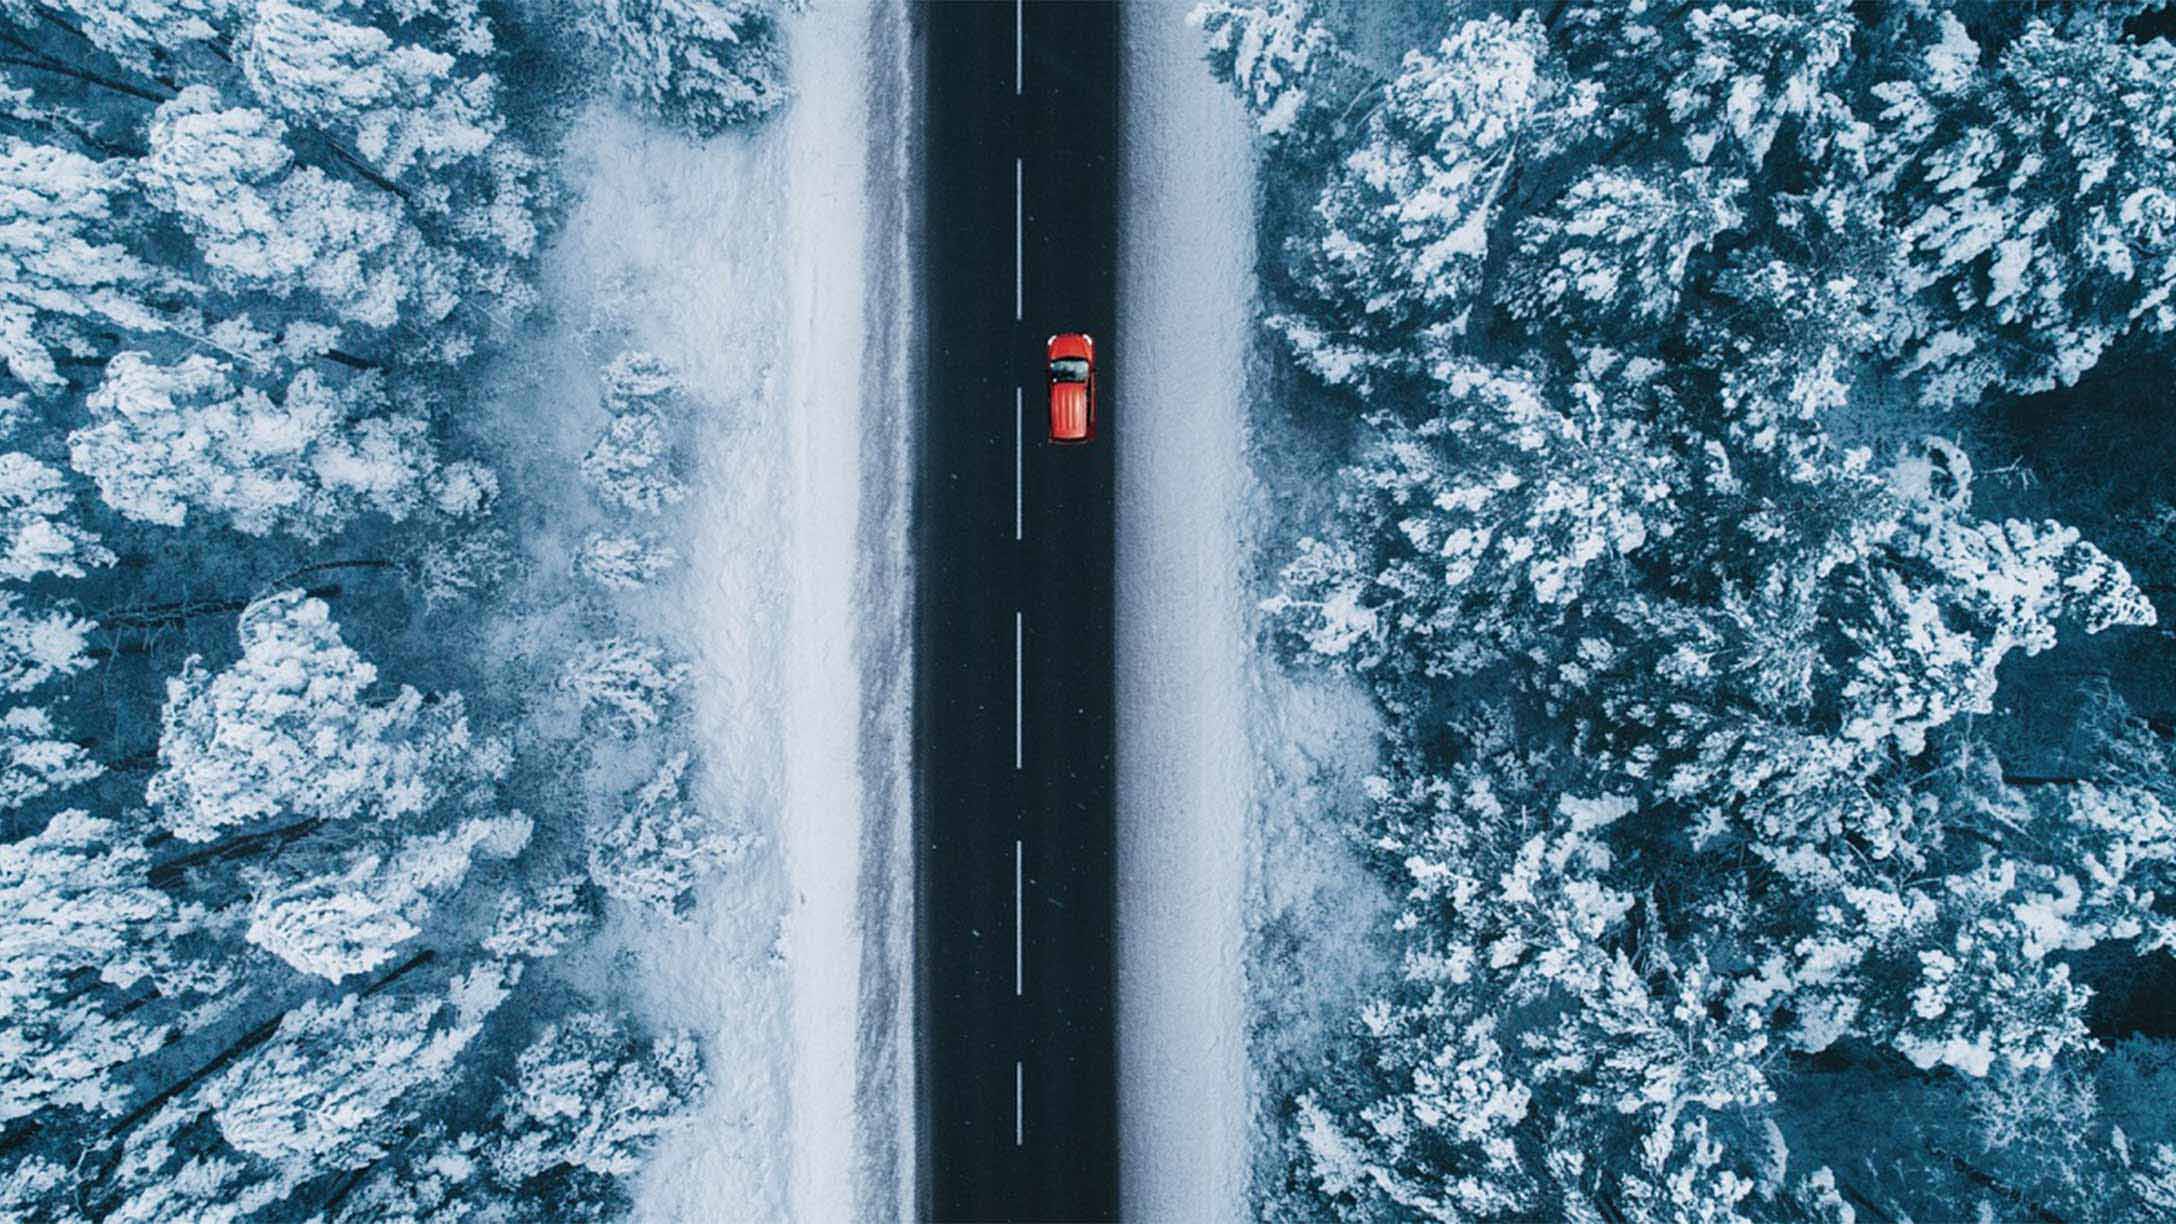 Top view of a car driving down a road in the winter